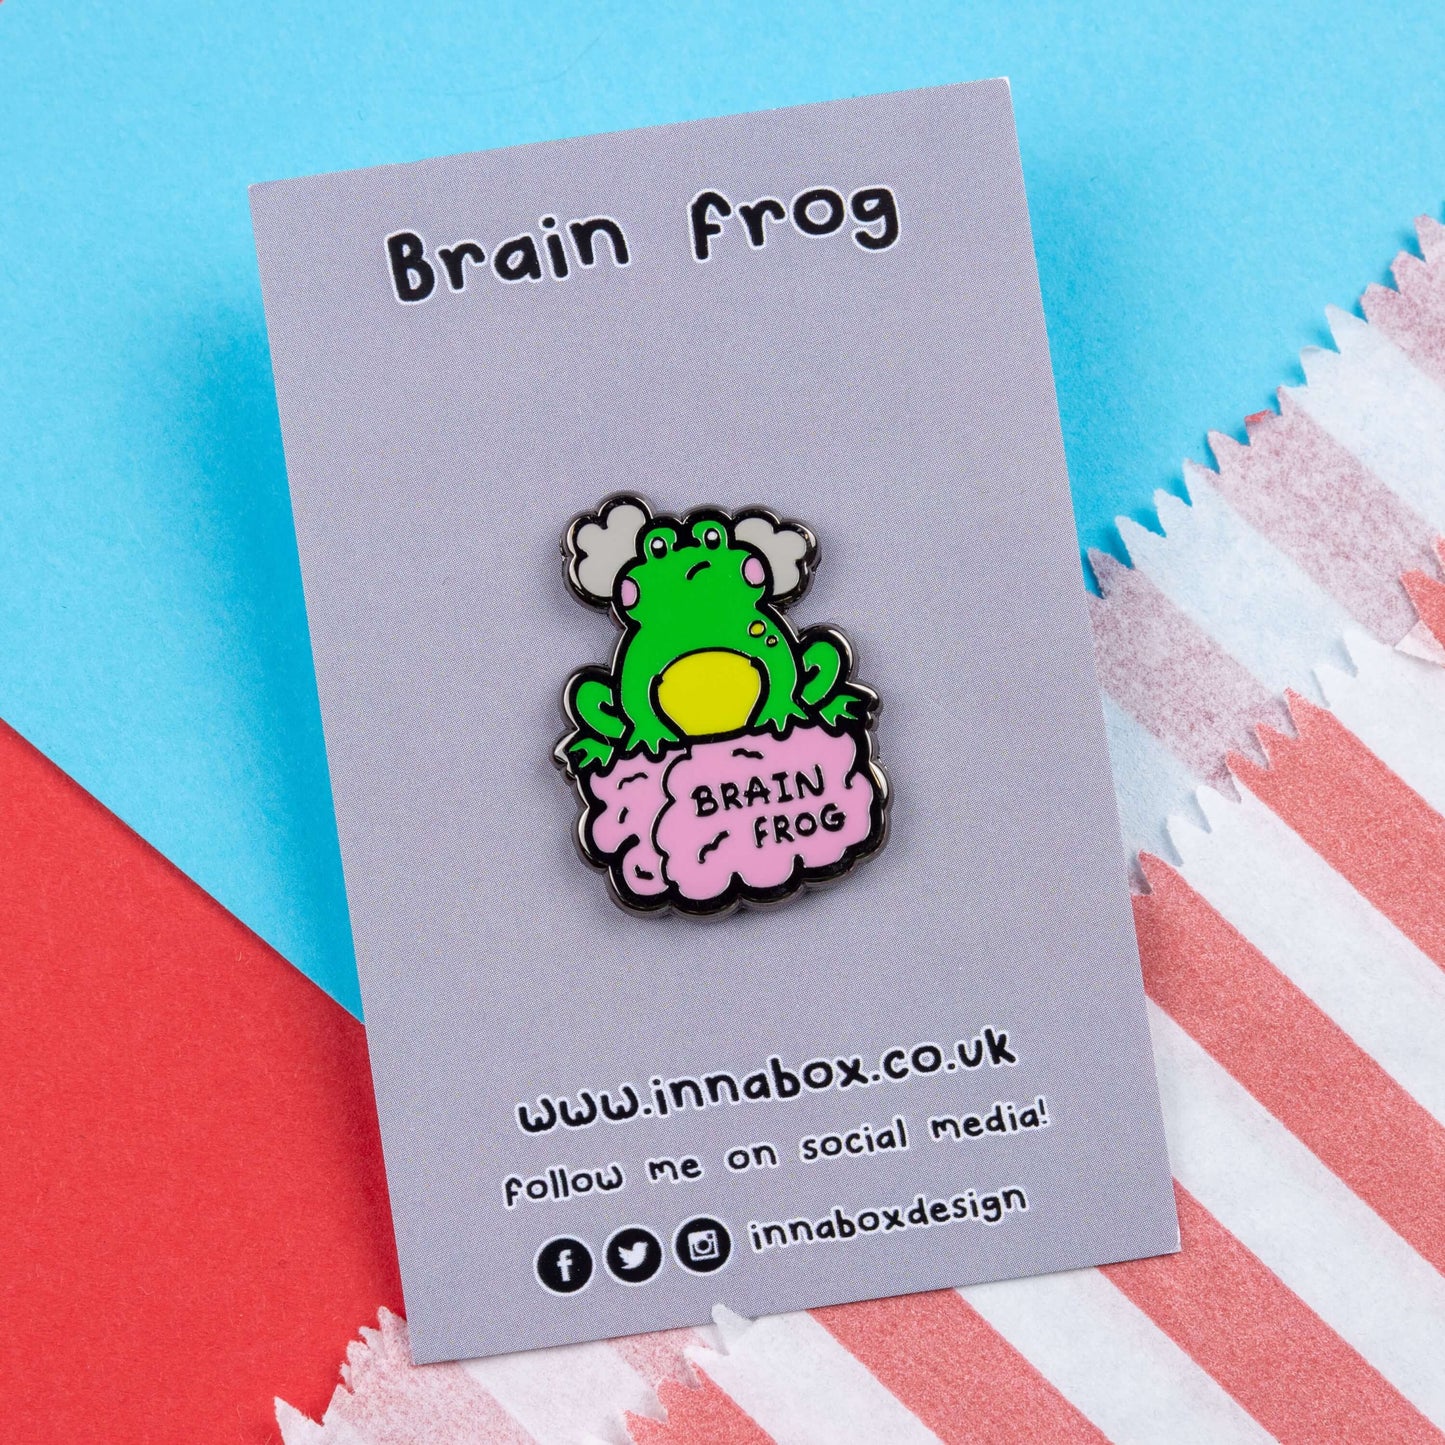 The Brain Frog Enamel Pin - Brain Fog on its grey backing card laid on a blue and red card background. The pin is of a green frog with pink blush cheeks looking confused with two grey clouds by its head, it is sat on a pink brain with the text reading Brain Frog. The design is raising awareness for brain fog.